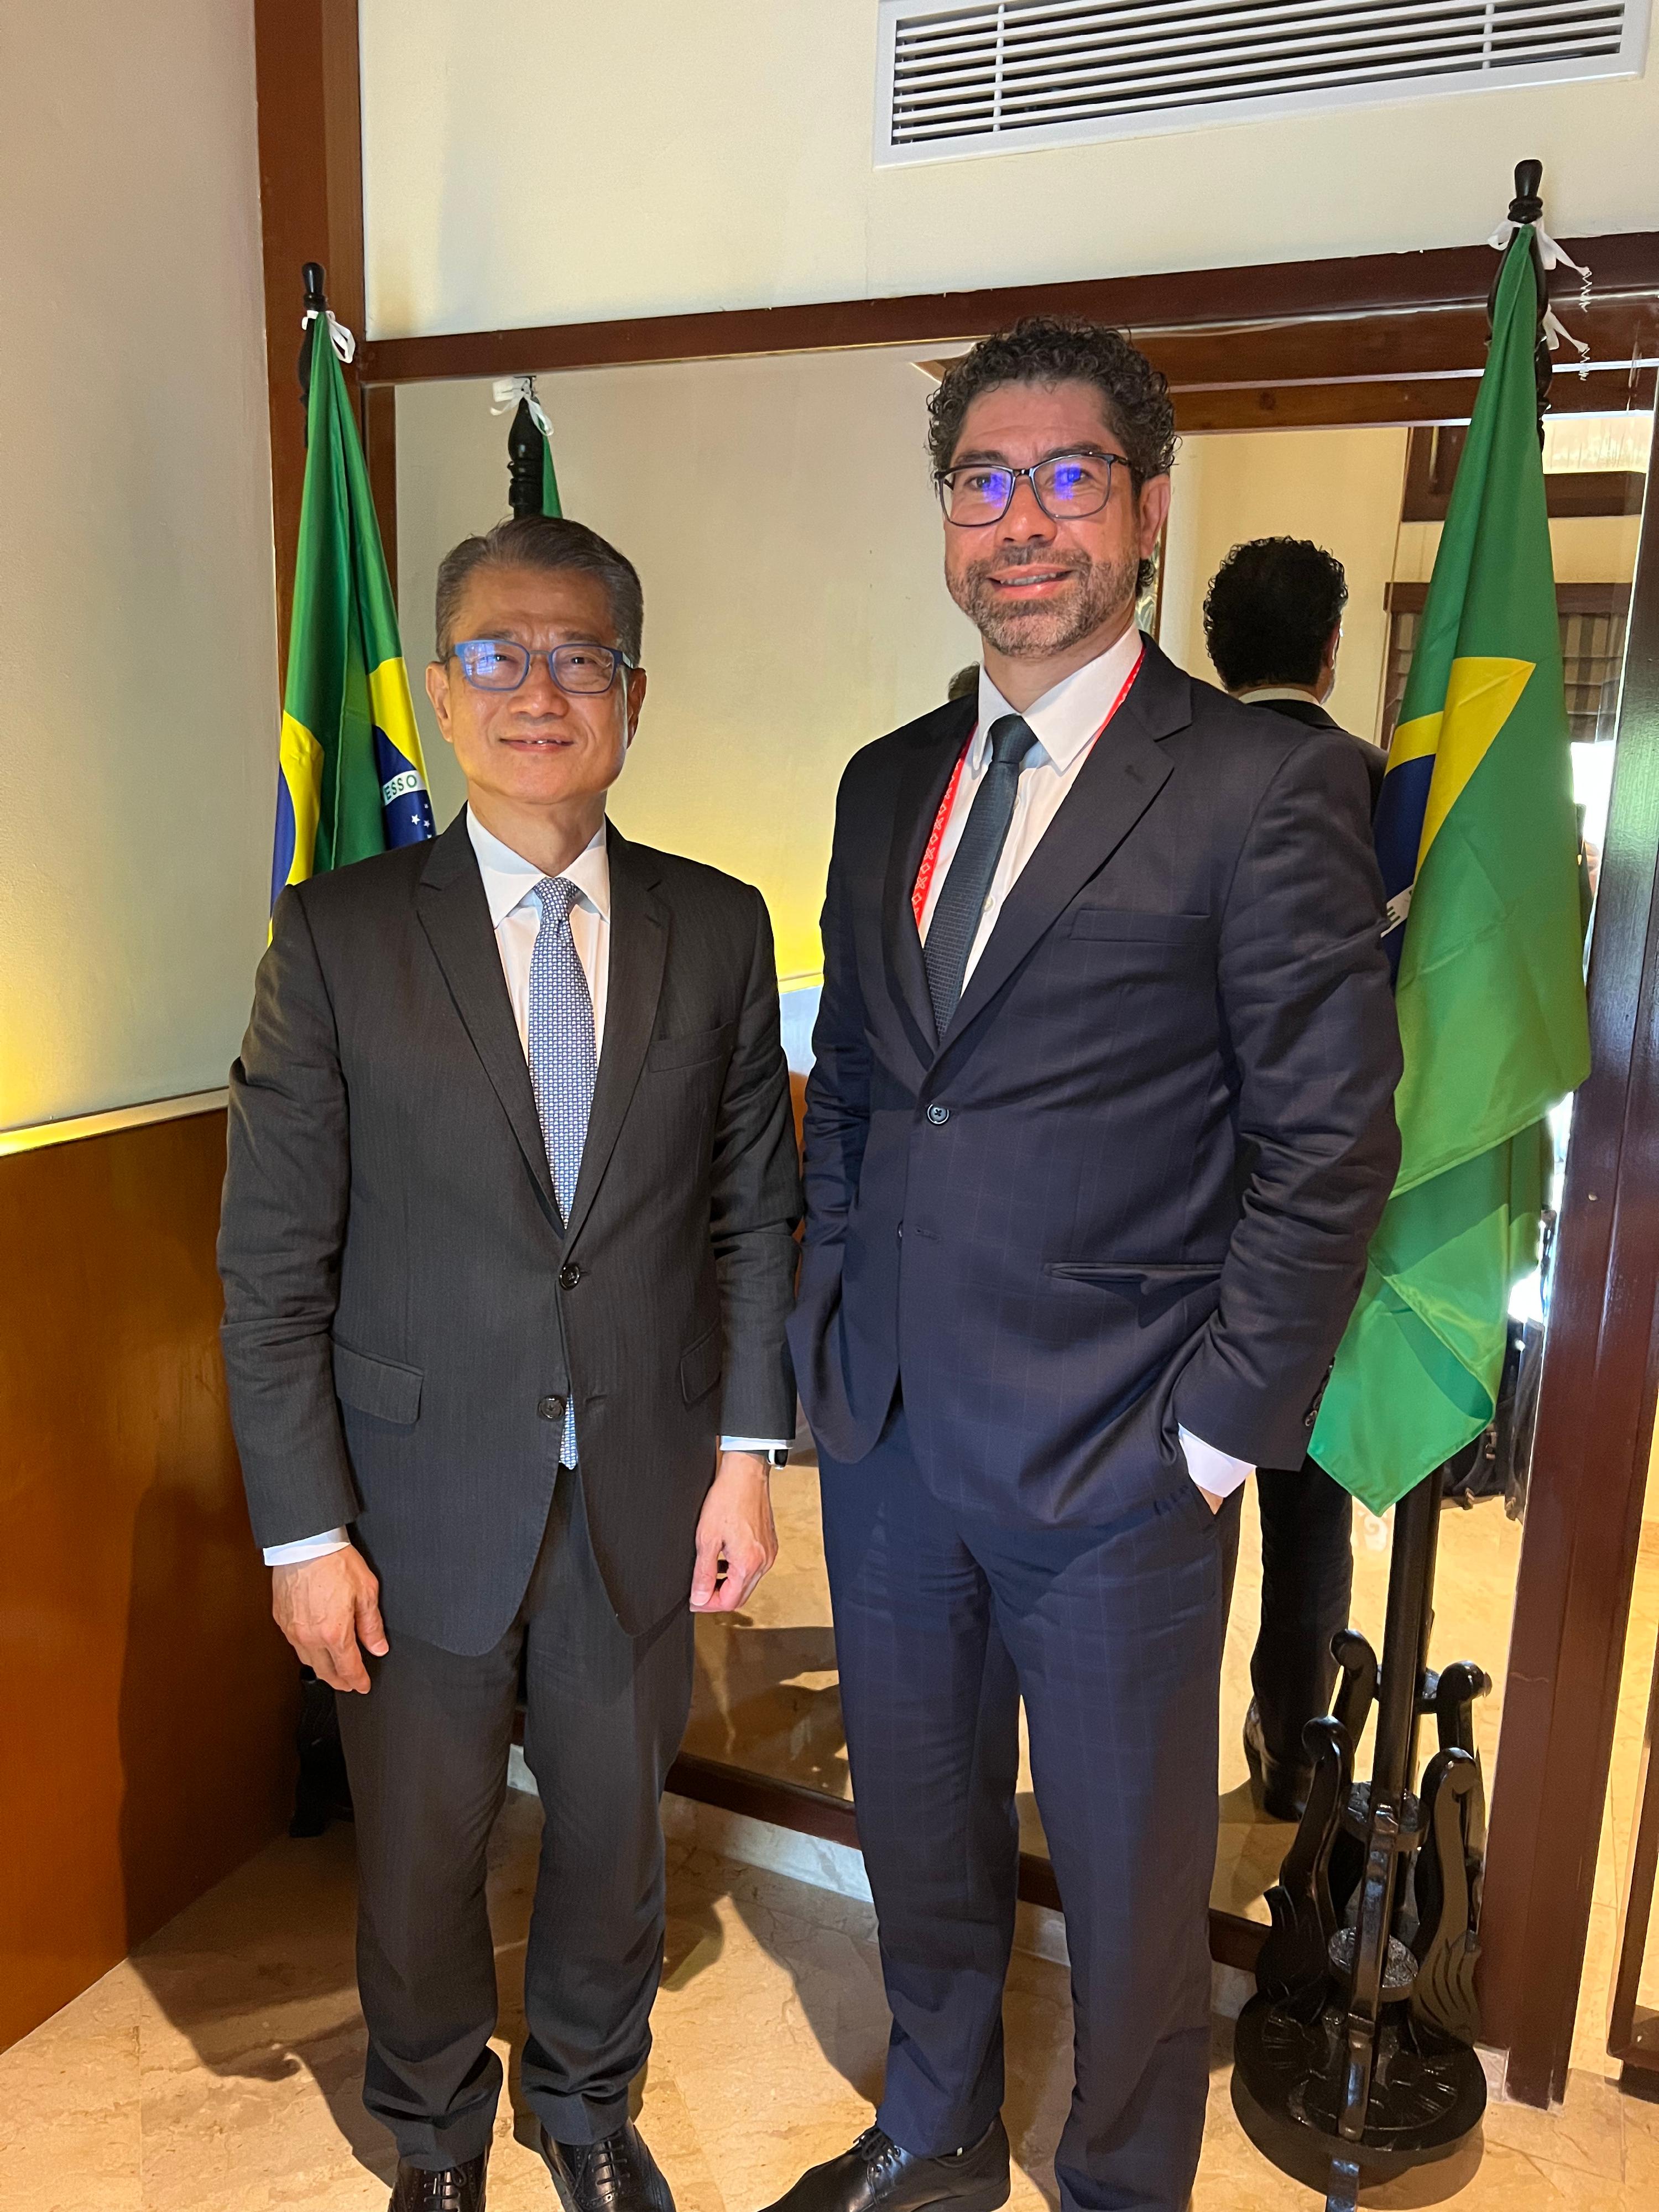 The Financial Secretary, Mr Paul Chan, today (November 16) continued to attend the Group of Twenty (G20) Leaders' Summit in Bali, Indonesia, as part of the delegation of the People's Republic of China. Photo shows Mr Chan (left) meeting with the Secretary for International Economic Affairs, Ministry of Economy of Brazil, Mr Marco Aurélio Rocha (right).